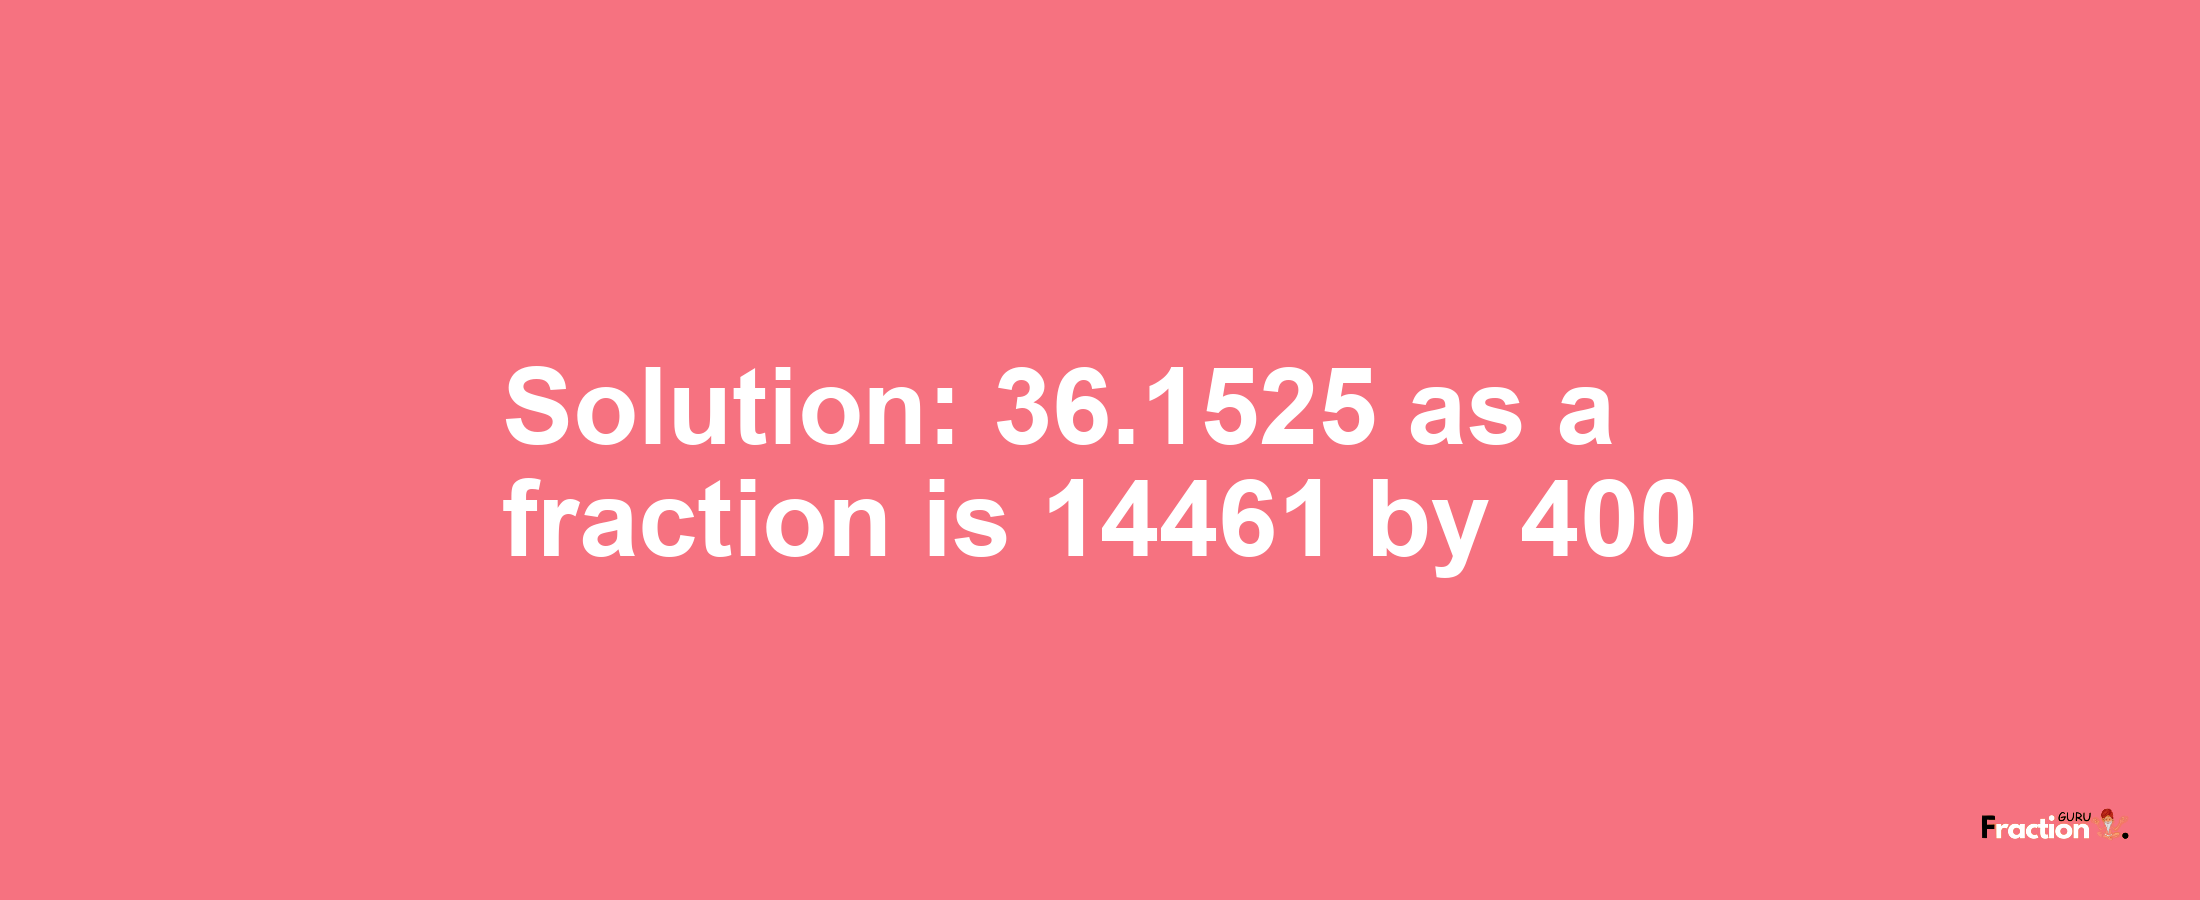 Solution:36.1525 as a fraction is 14461/400